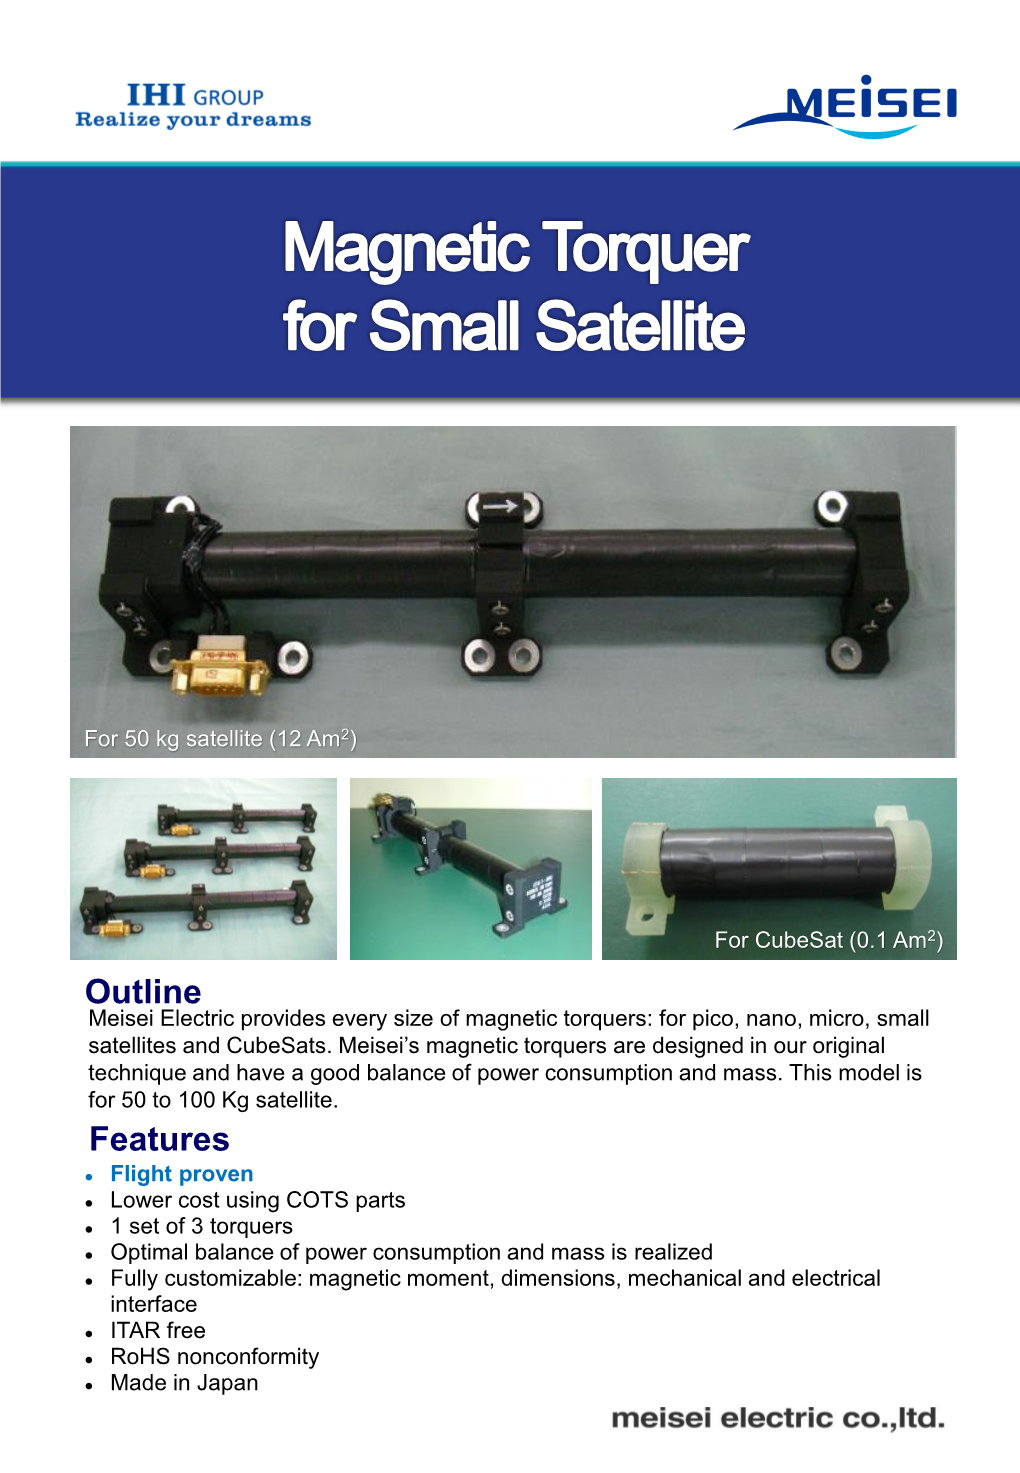 Magnetic Torquer for Small Satellite